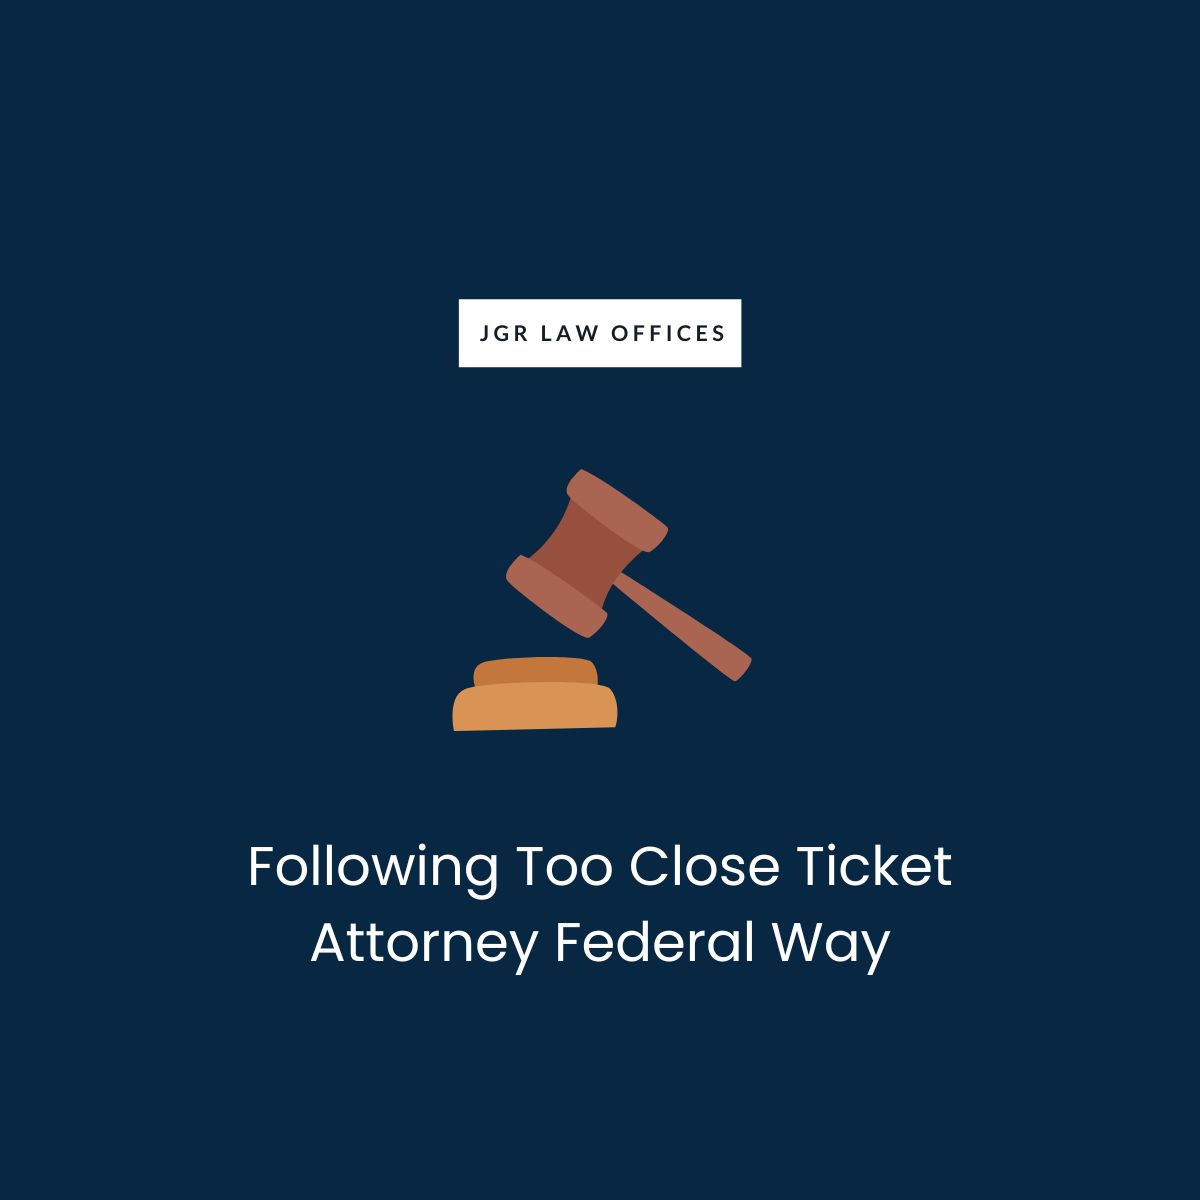 Following Too Close Ticket Attorney Federal Way